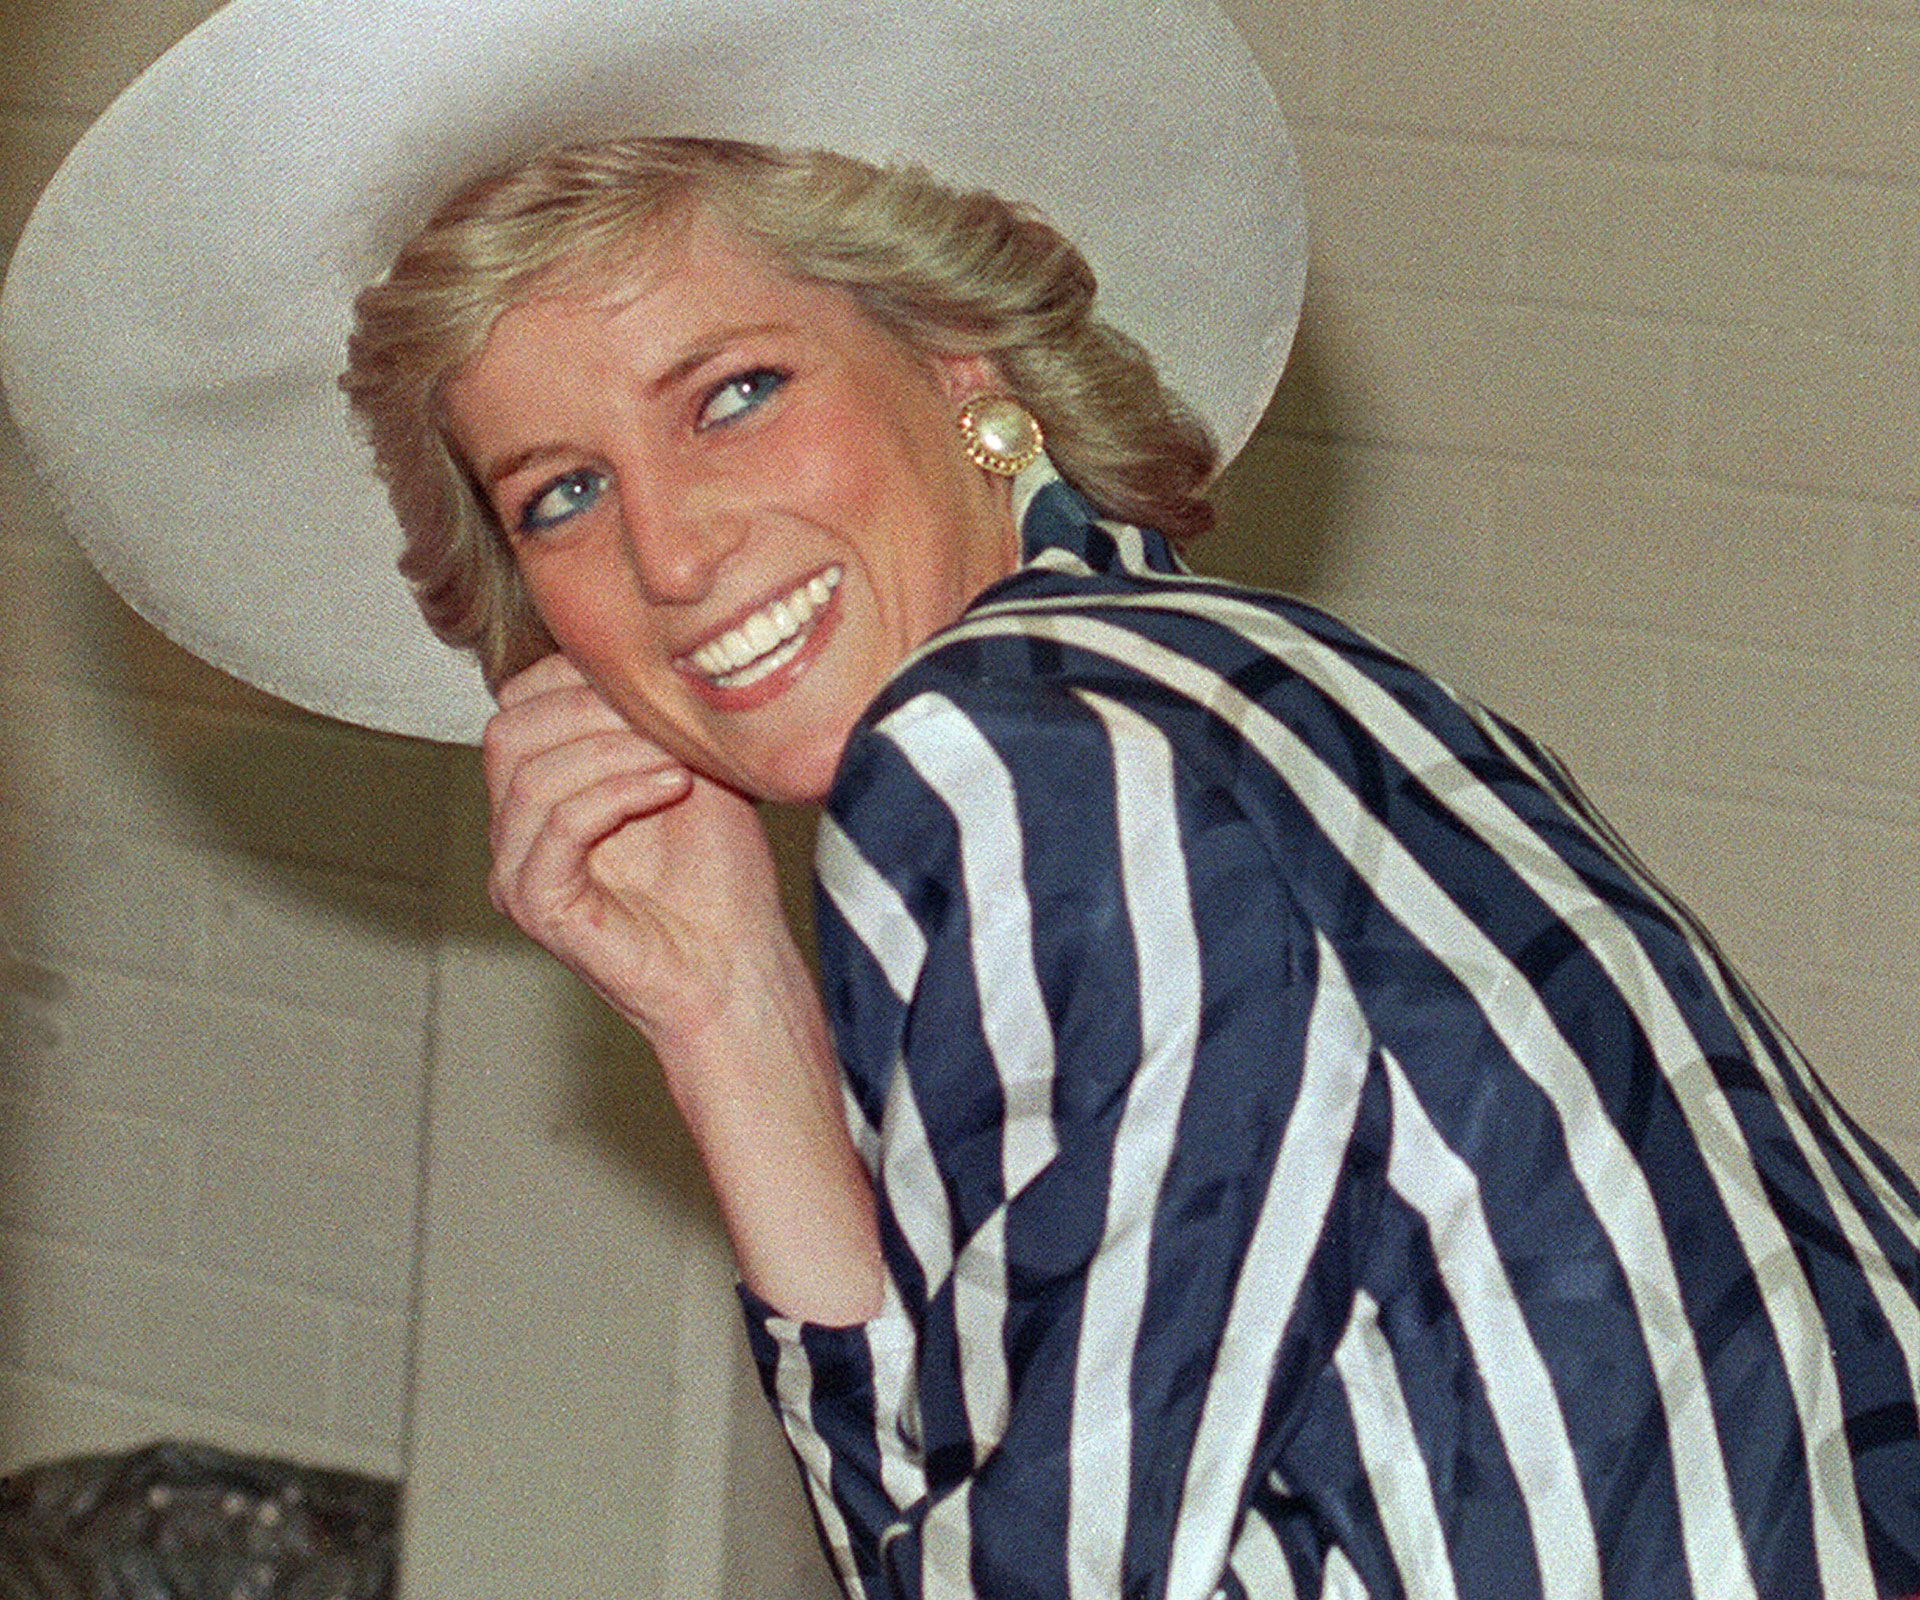 Celebrating Princess Diana’s life and legacy, in honour of her 55th birthday